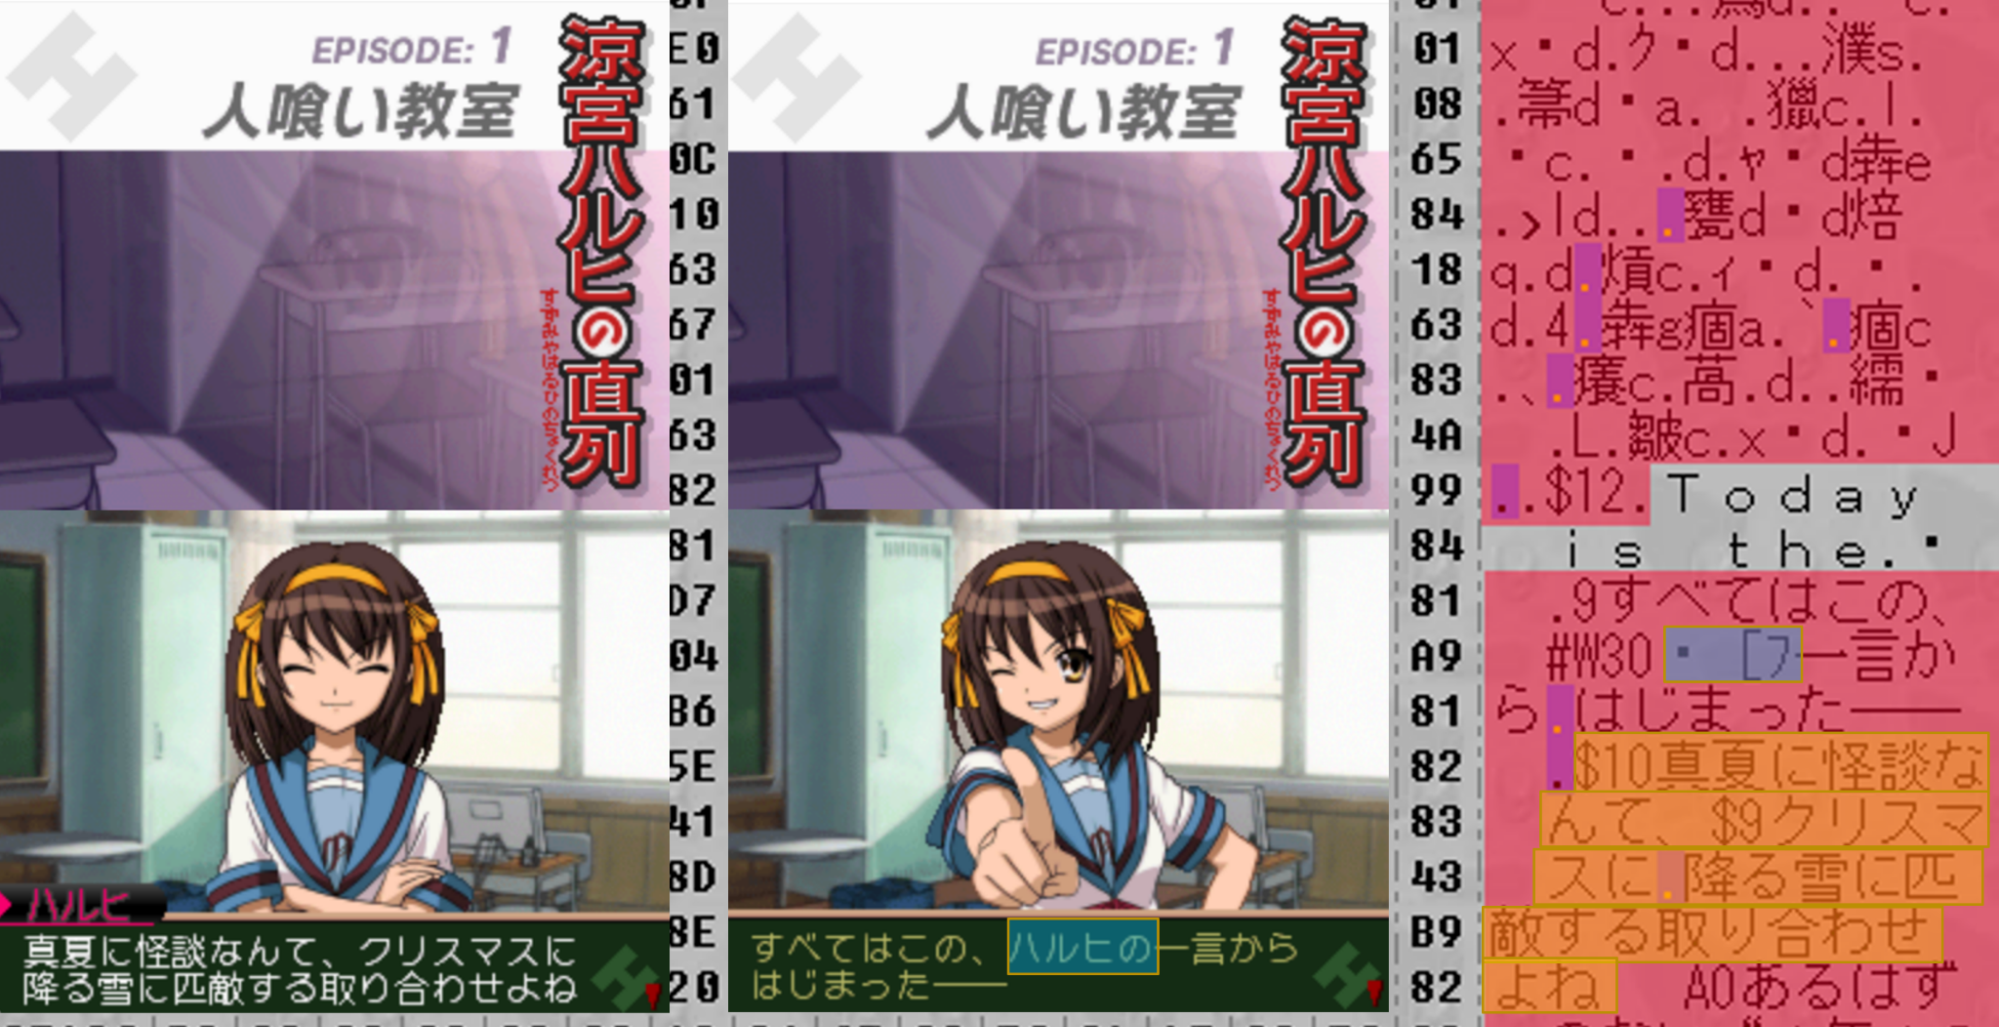 Side-by-side screenshots of Chokuretsu. The first corresponds to text highlighted in yellow showing that Haruhi's dialogue is present. The second highlights a section of the text in the ROM that is apparently misisng a portion of the in-game text.